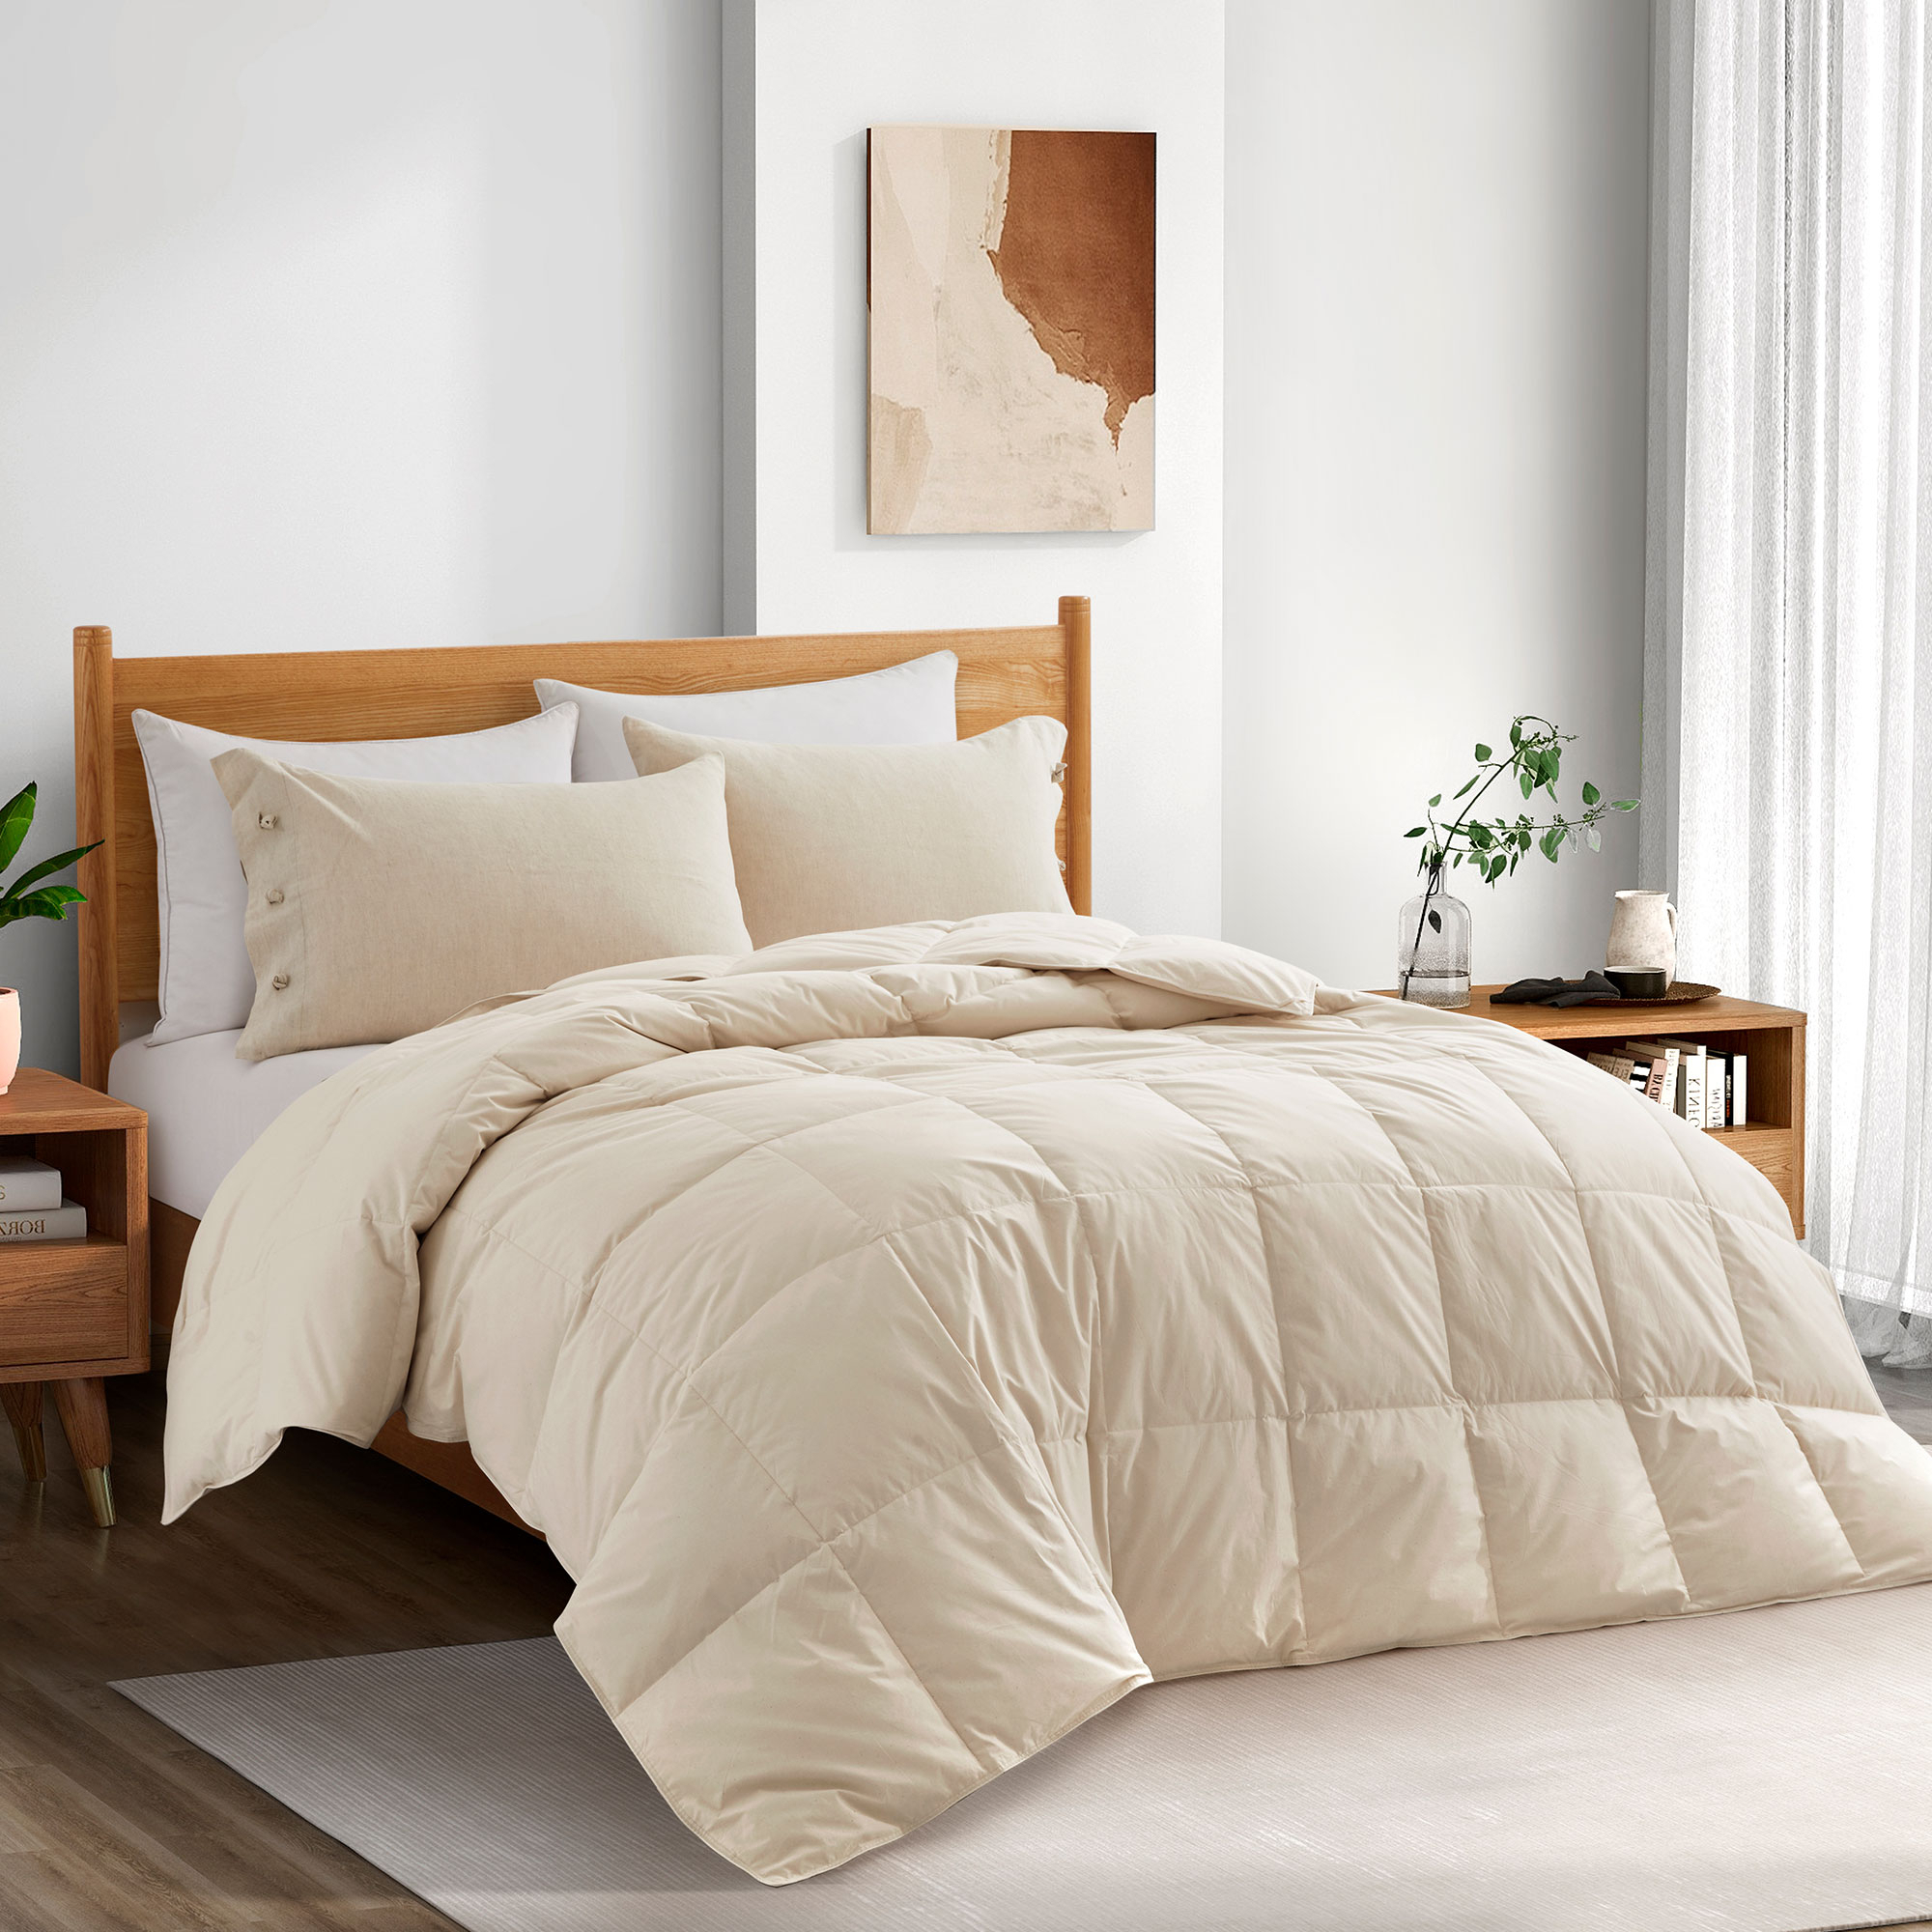 All Season Organic Cotton Comforter Filled With Down And Feather Fiber - Fawn, King